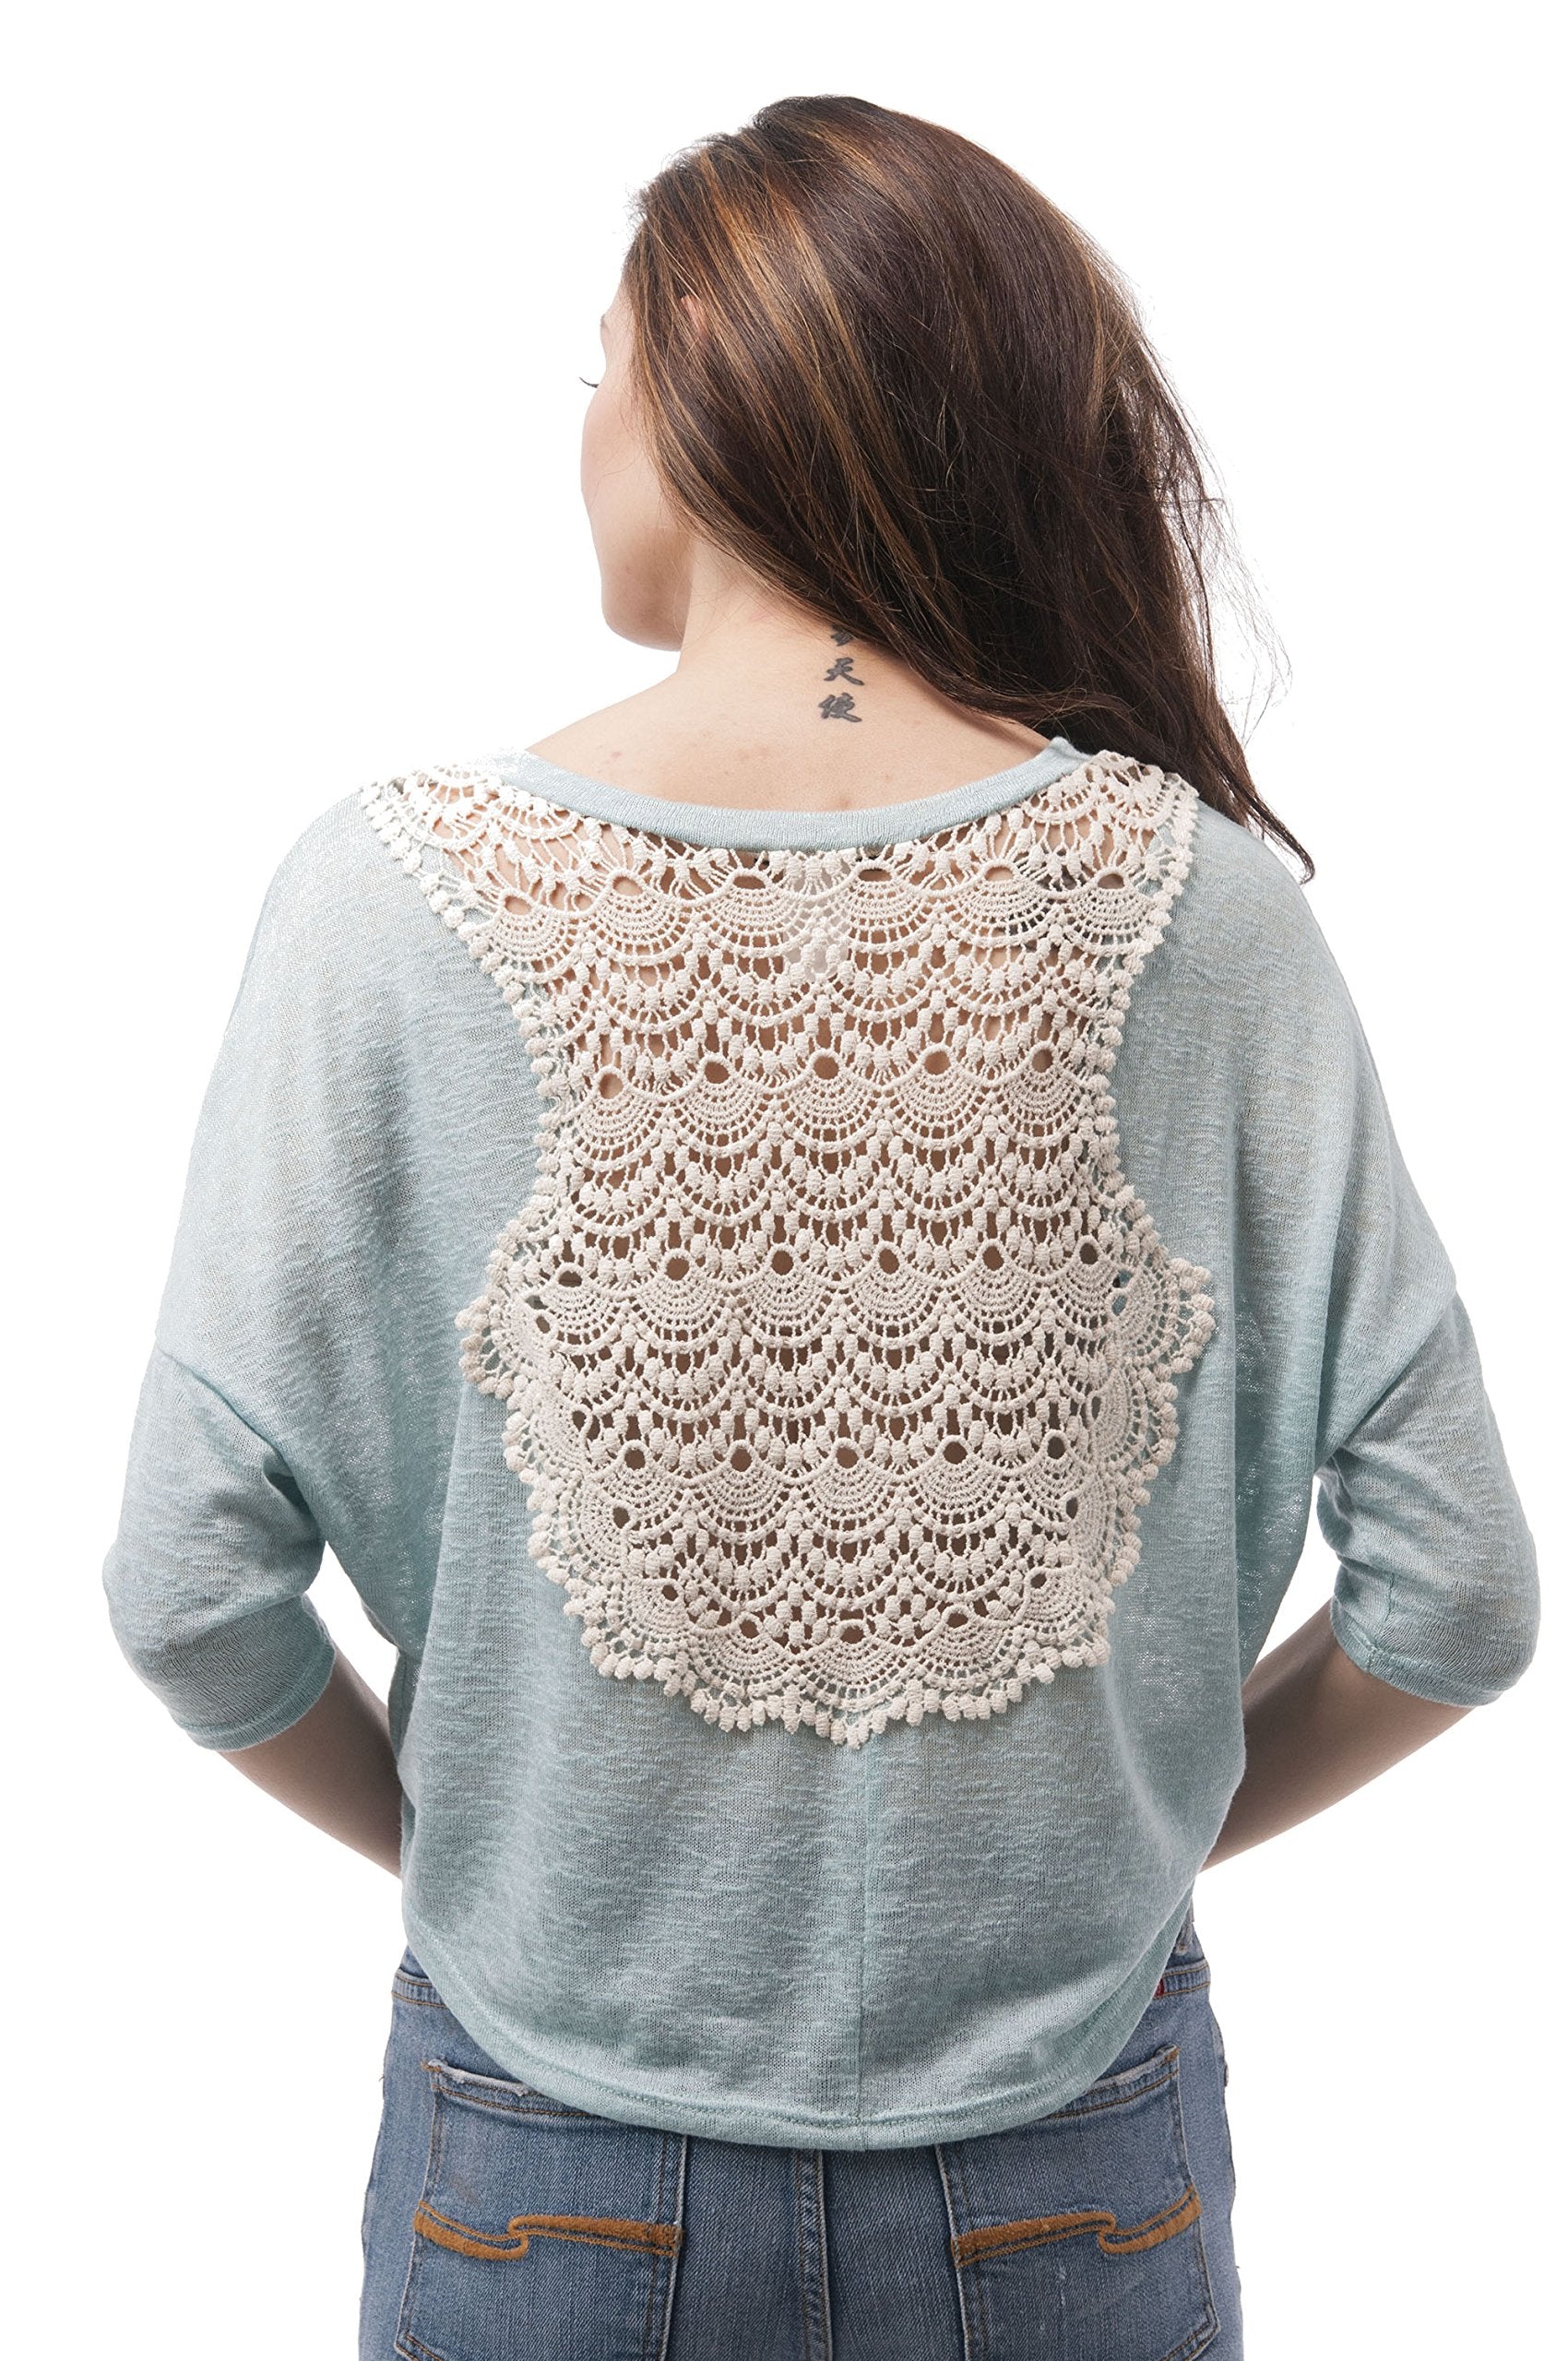 Batwing crop top with knit design on back